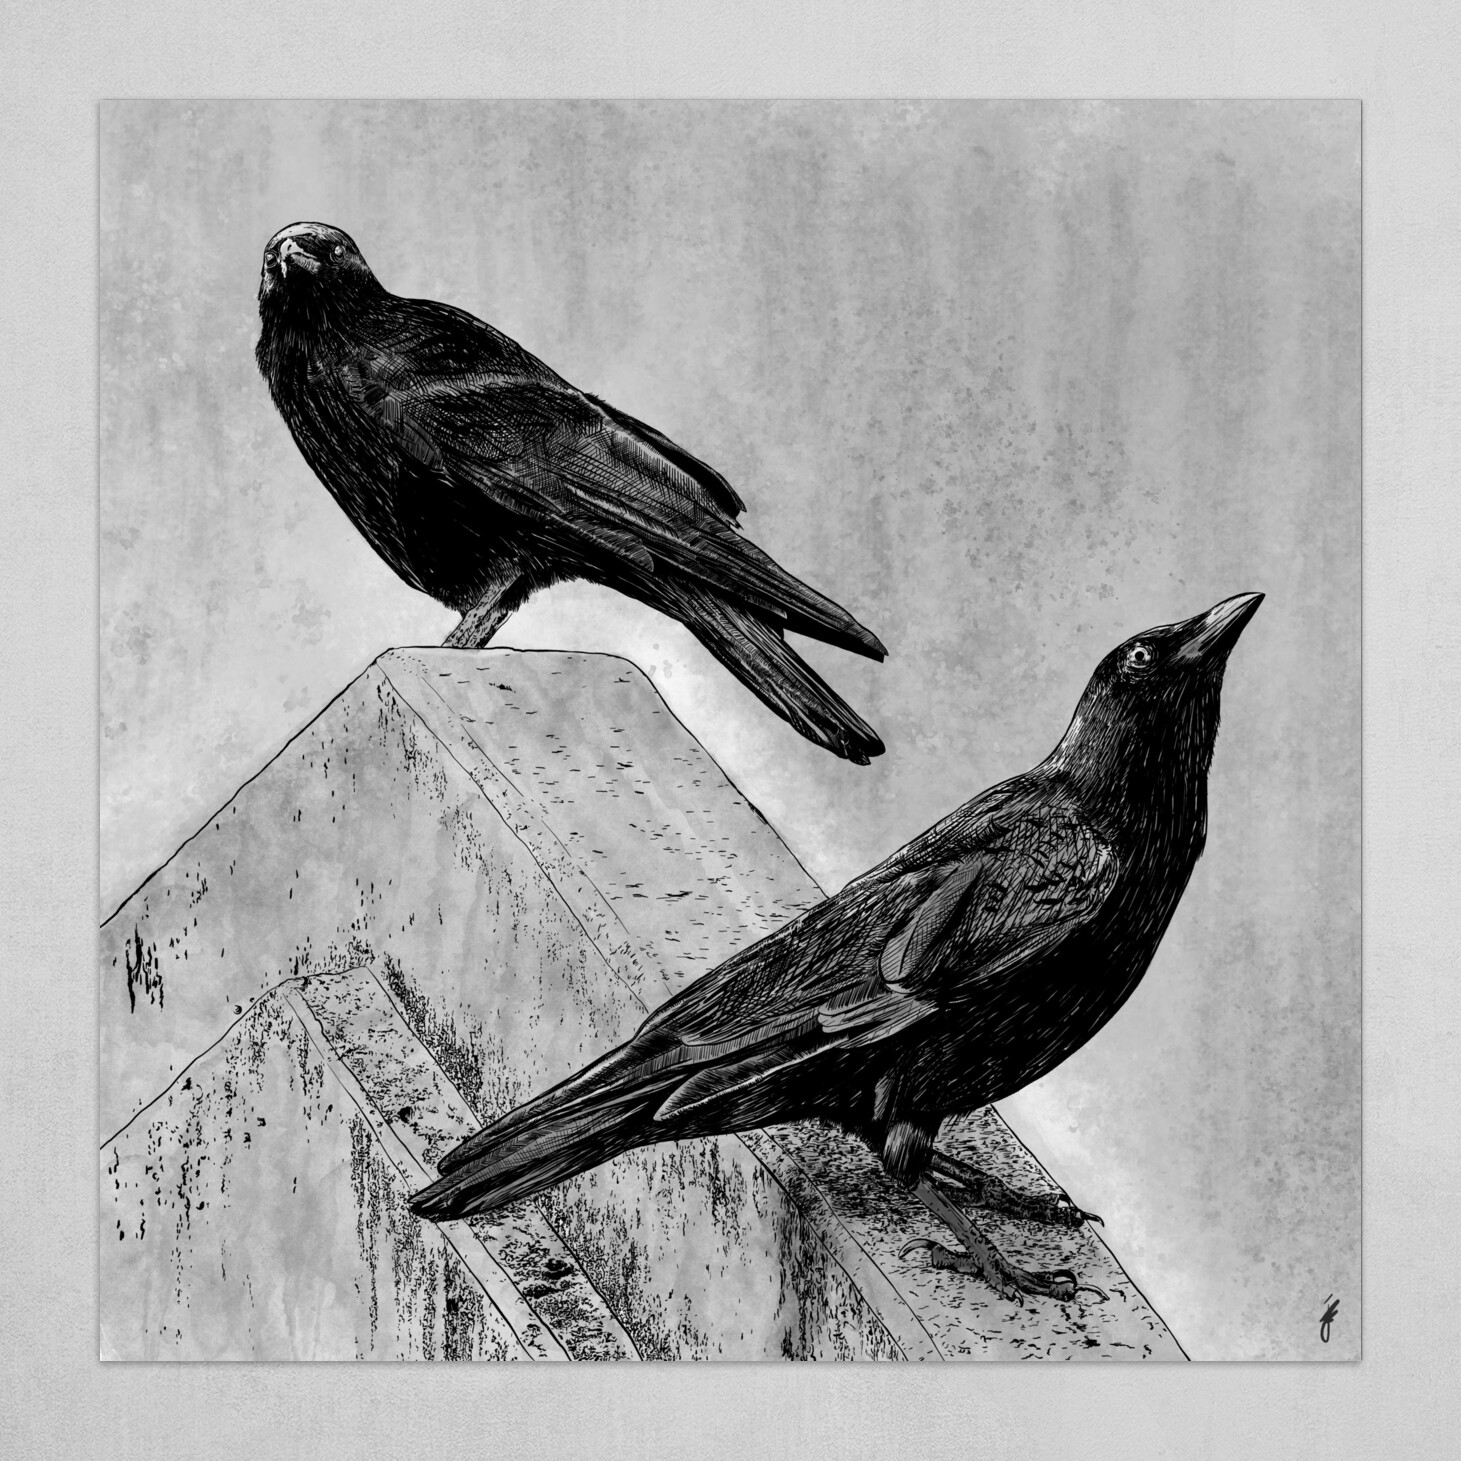 two crows pose